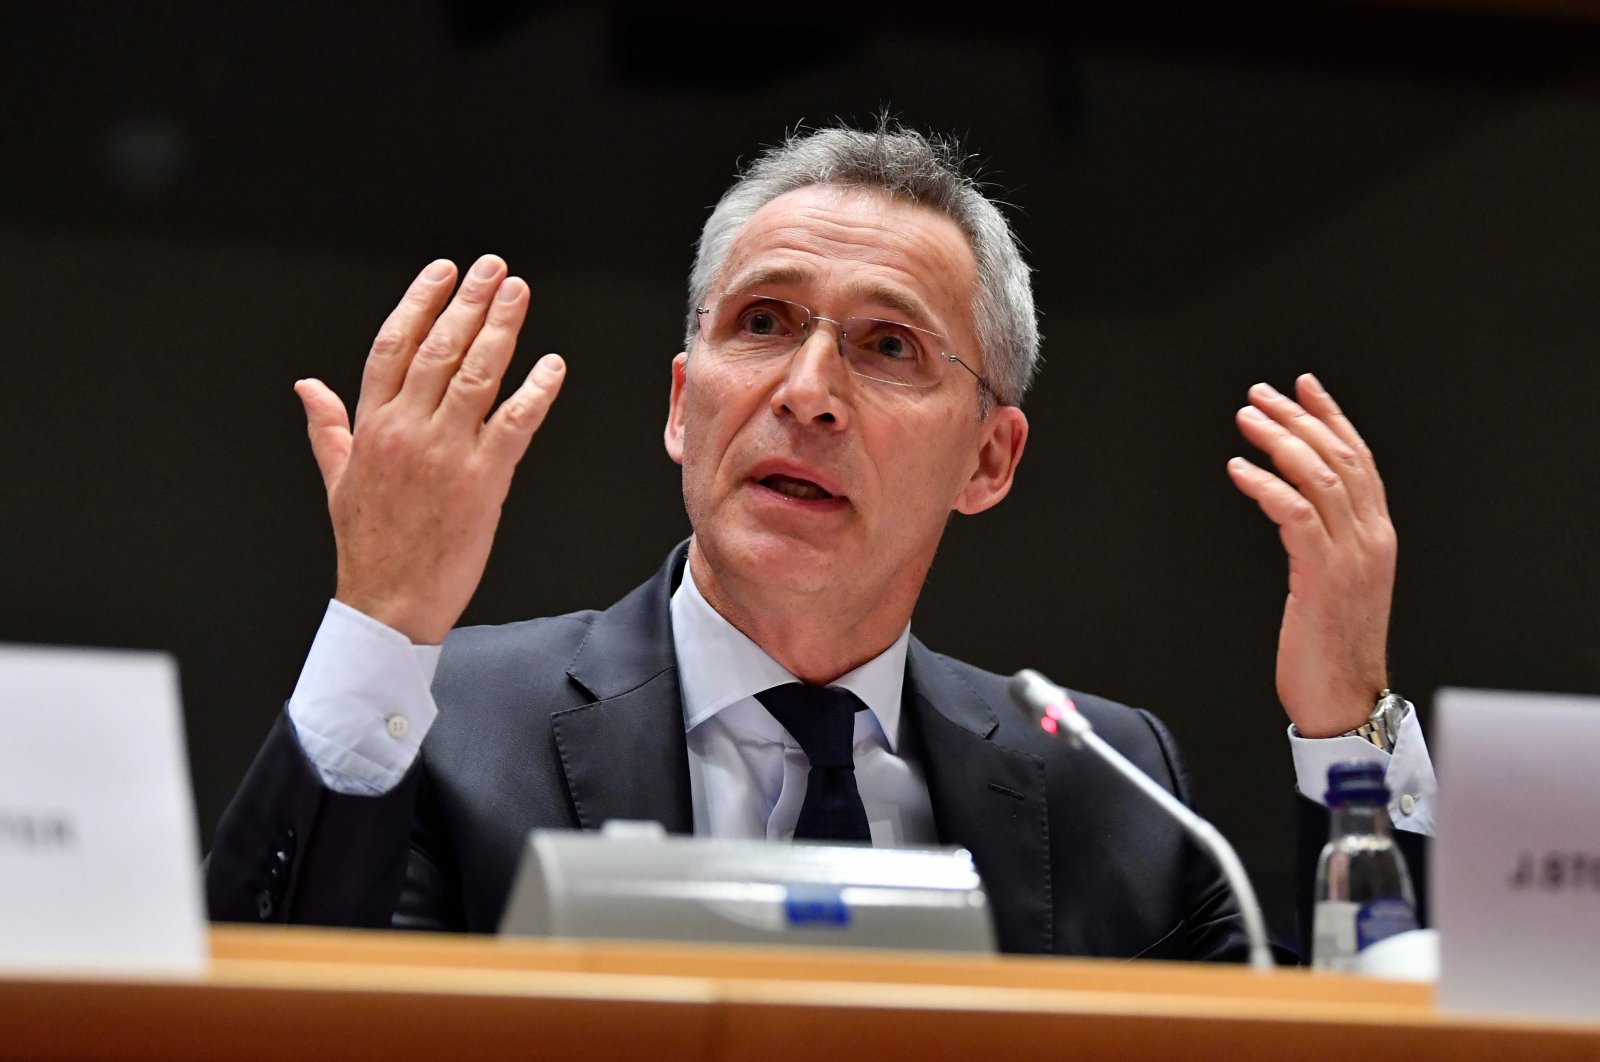 NATO Secretary-General Jens Stoltenberg addresses the European Parliament Committee on Foreign Affairs (AFET) and Subcommittee on Security and Defence (SEDE) at the EU headquarters in Brussels, Jan. 21, 2020. (AFP Photo)